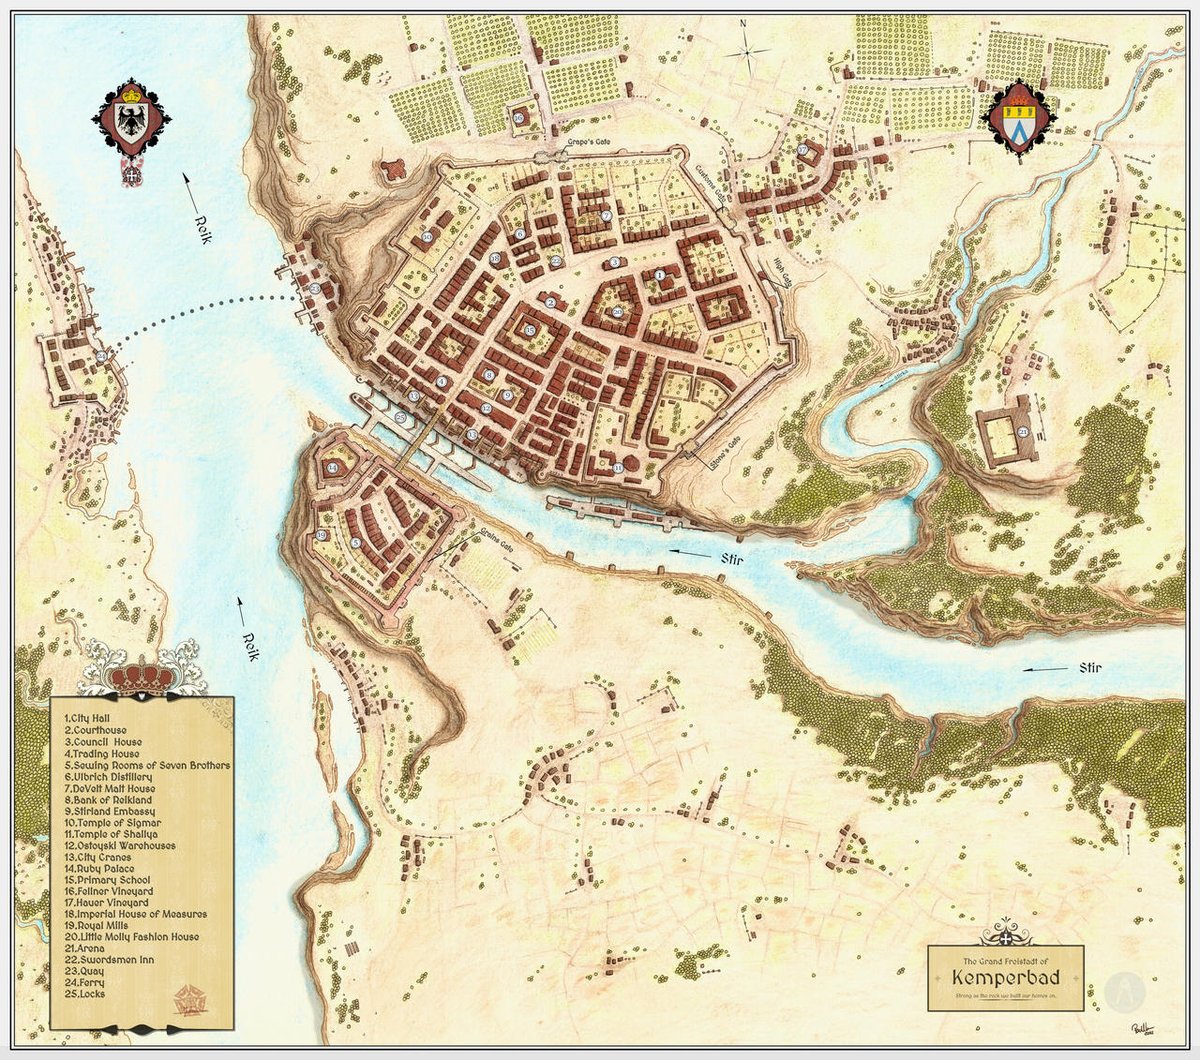 Want a cool Kemperbad map? PlanJanusza has you covered! This is another excellent #WFRP map from this artist, be sure to check out his #deviantart account. #TTRPG deviantart.com/planjanusza/ar…